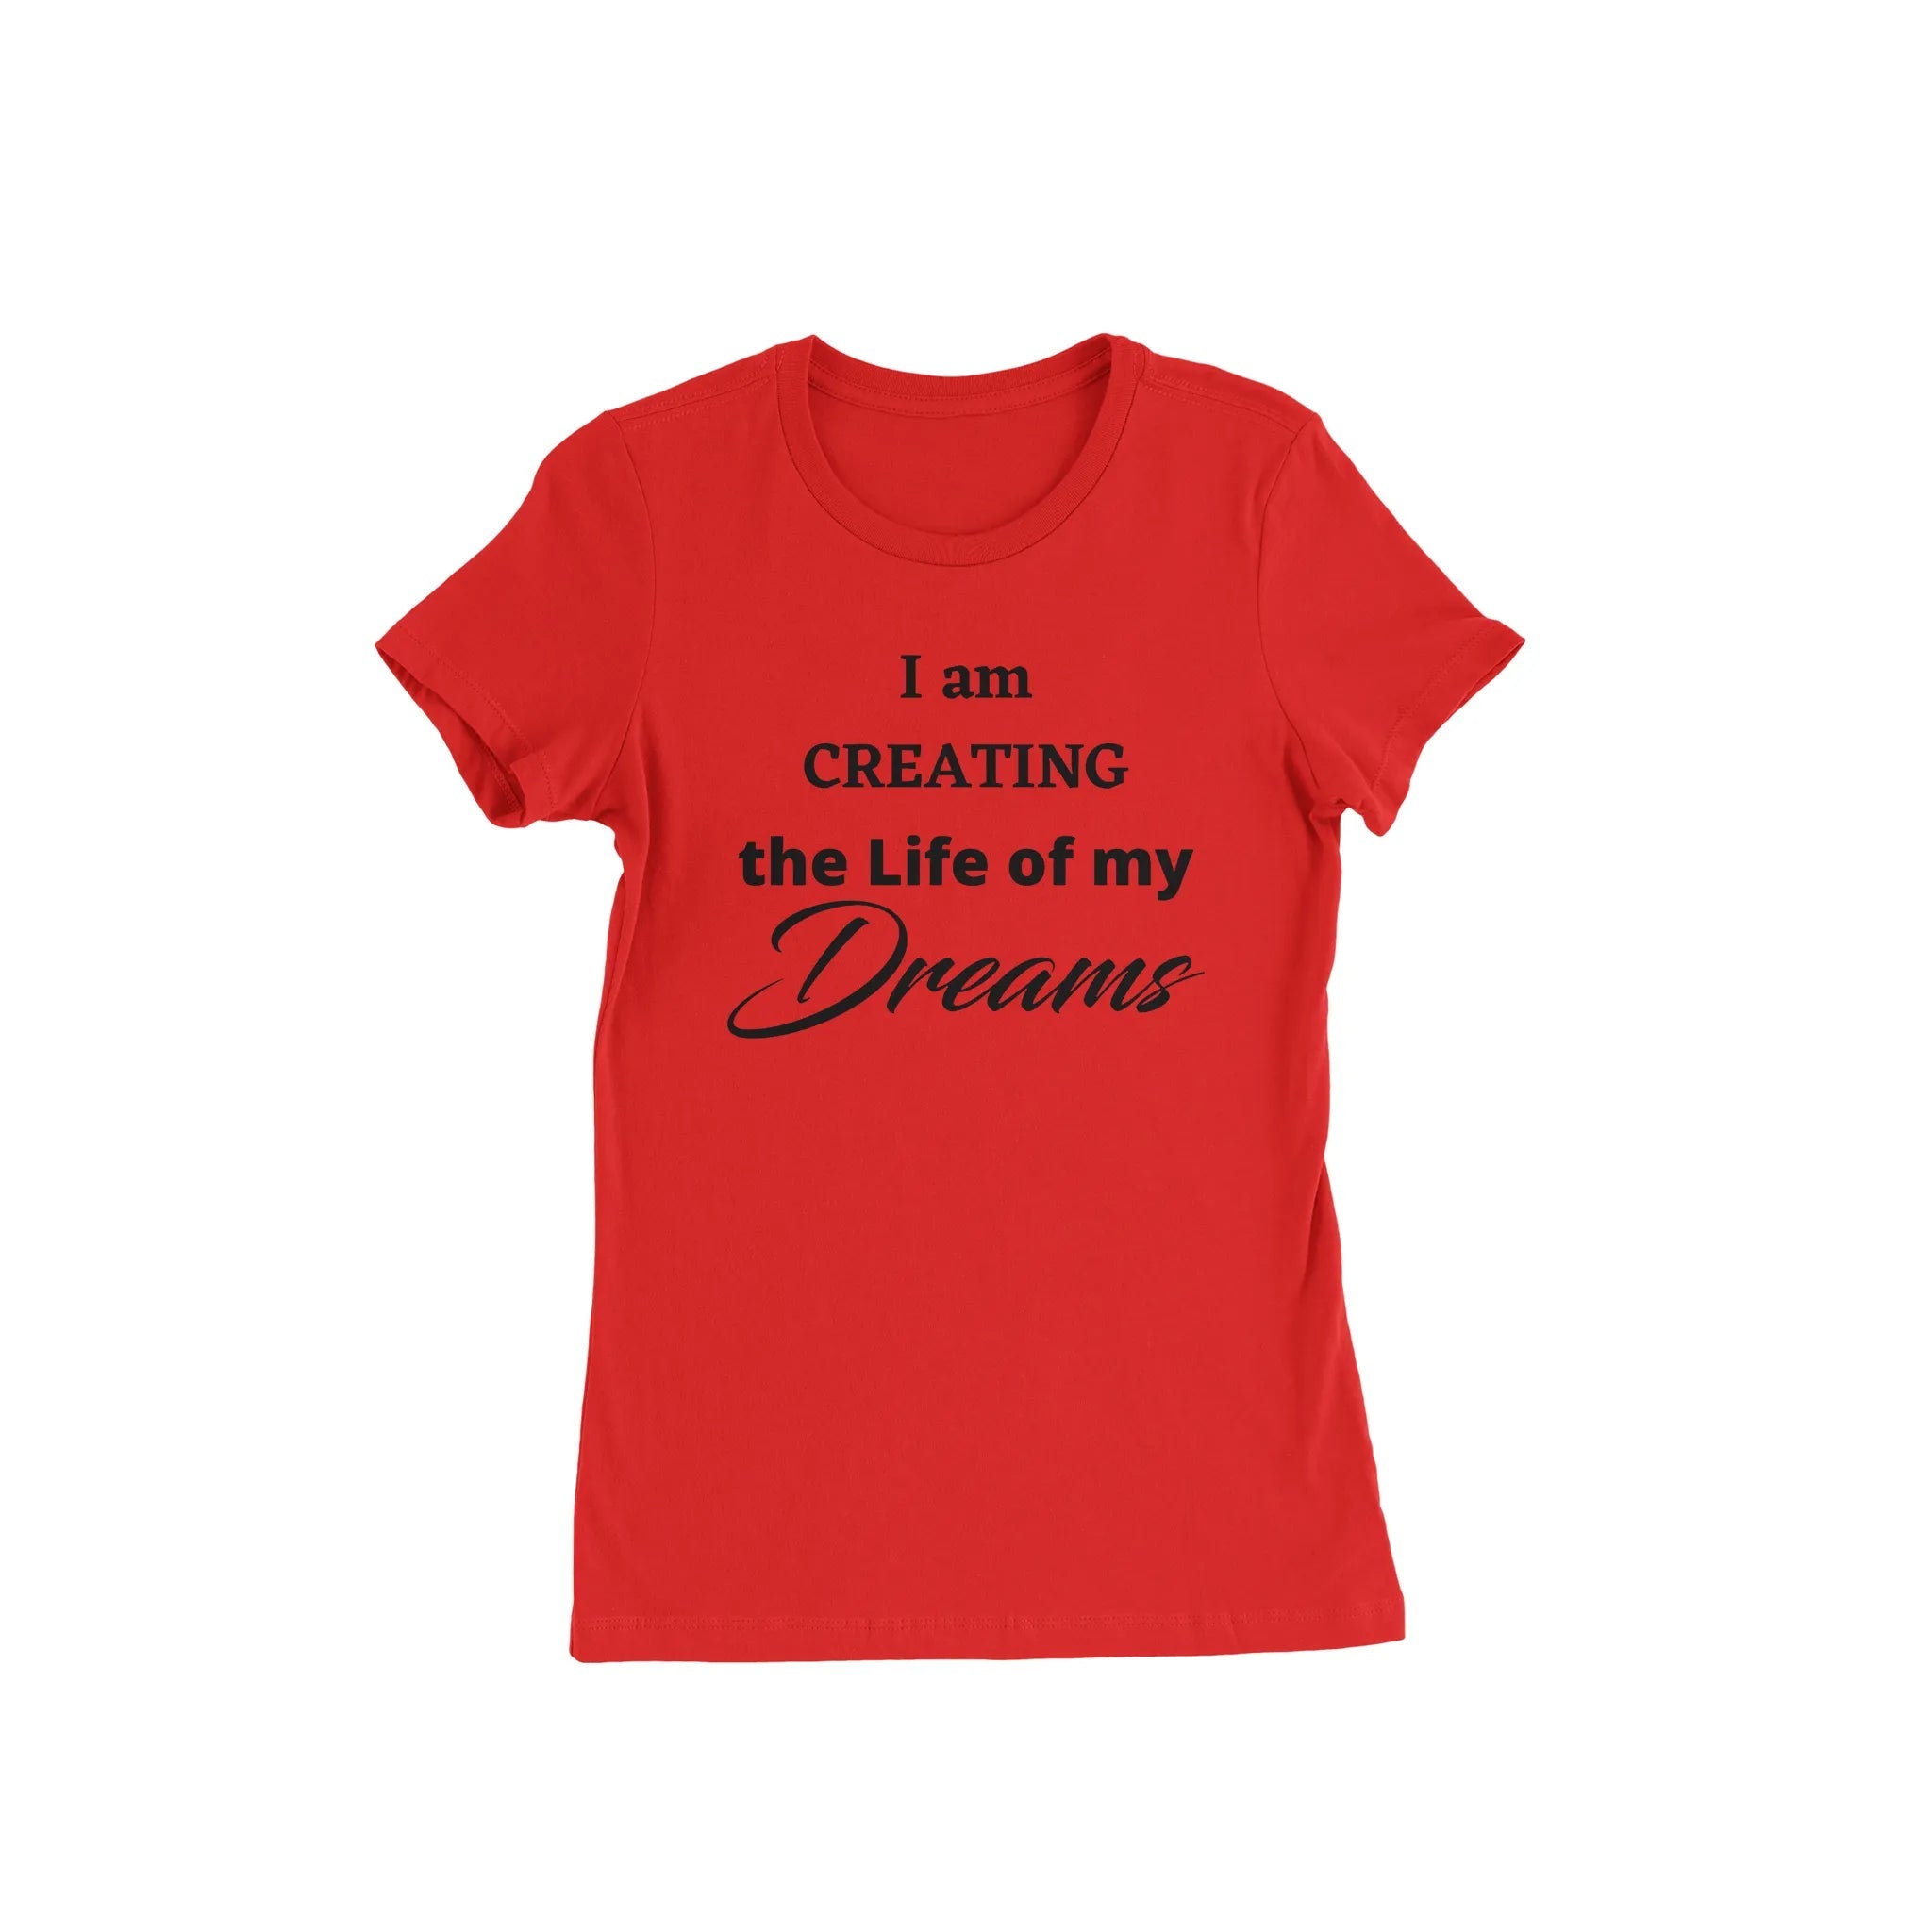 I am creating the Life of my Dreams Red T - Shirt - Diva Starr Boutique